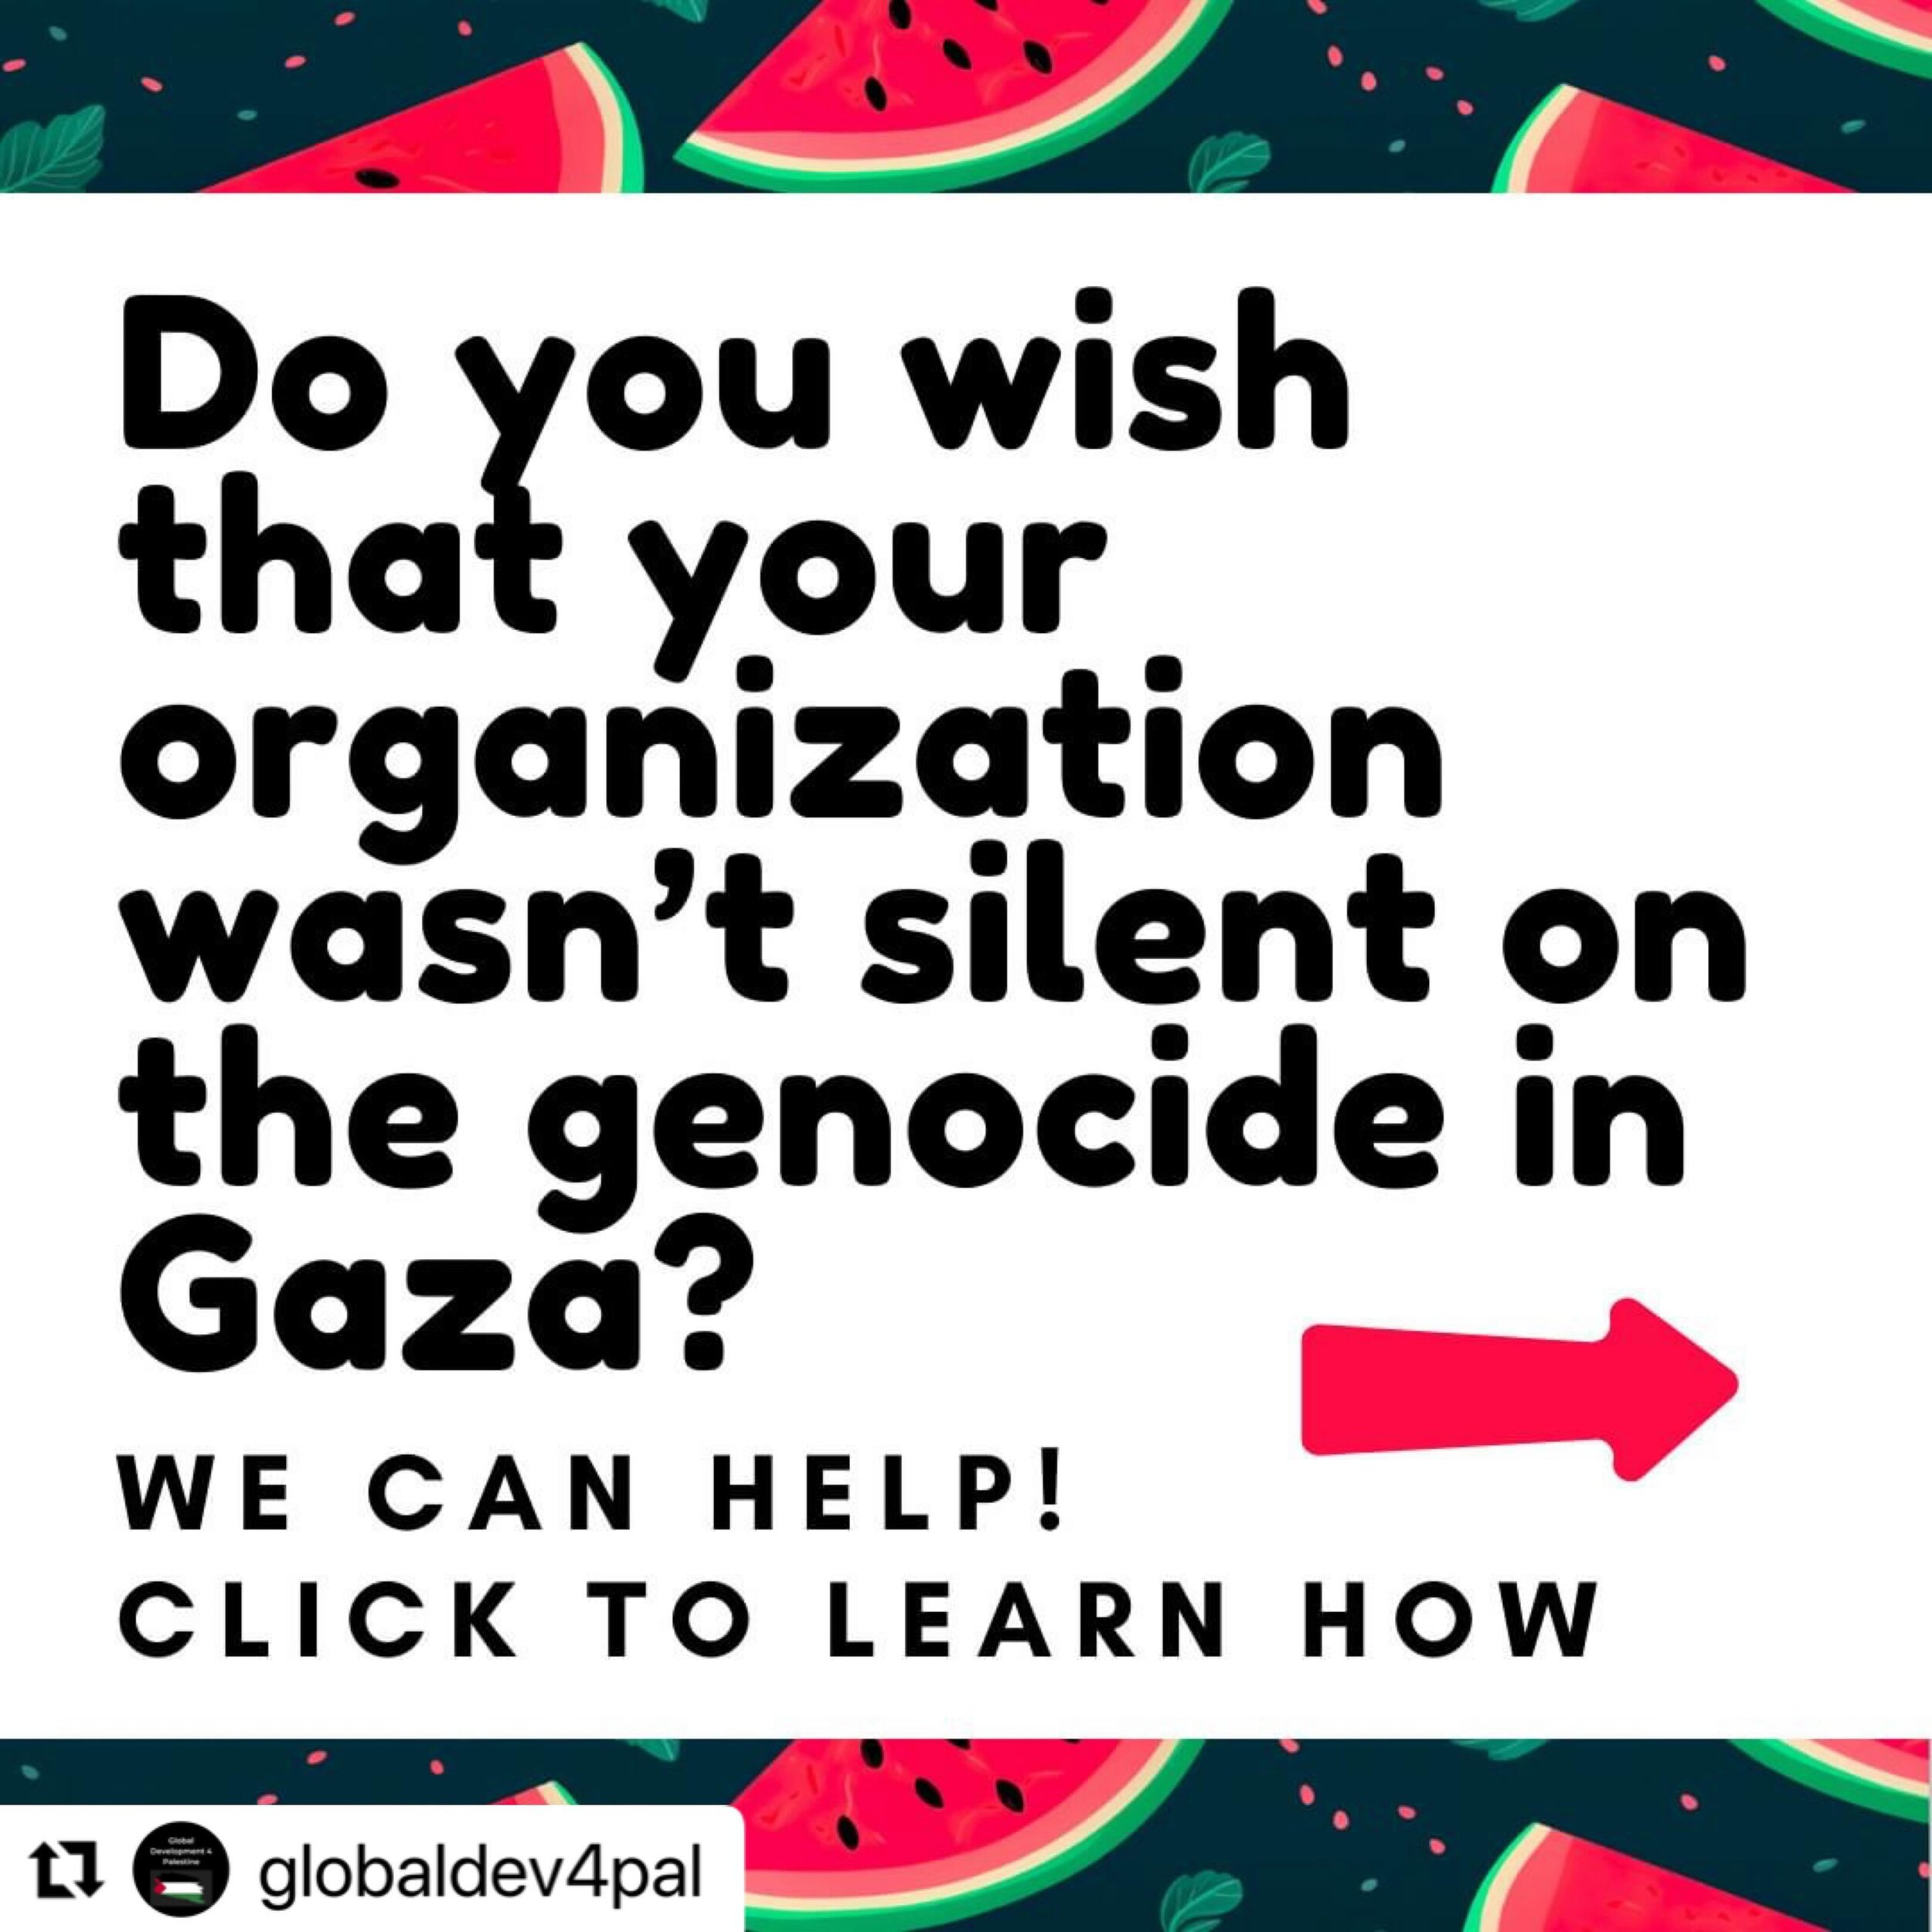 #Repost @globaldev4pal with @use.repost
・・・
Has your organization still not released a statement calling for a ceasefire?

Has your organization called for a ceasefire but taking no further action? 

We can help! Contact us today to:

1) Get free con